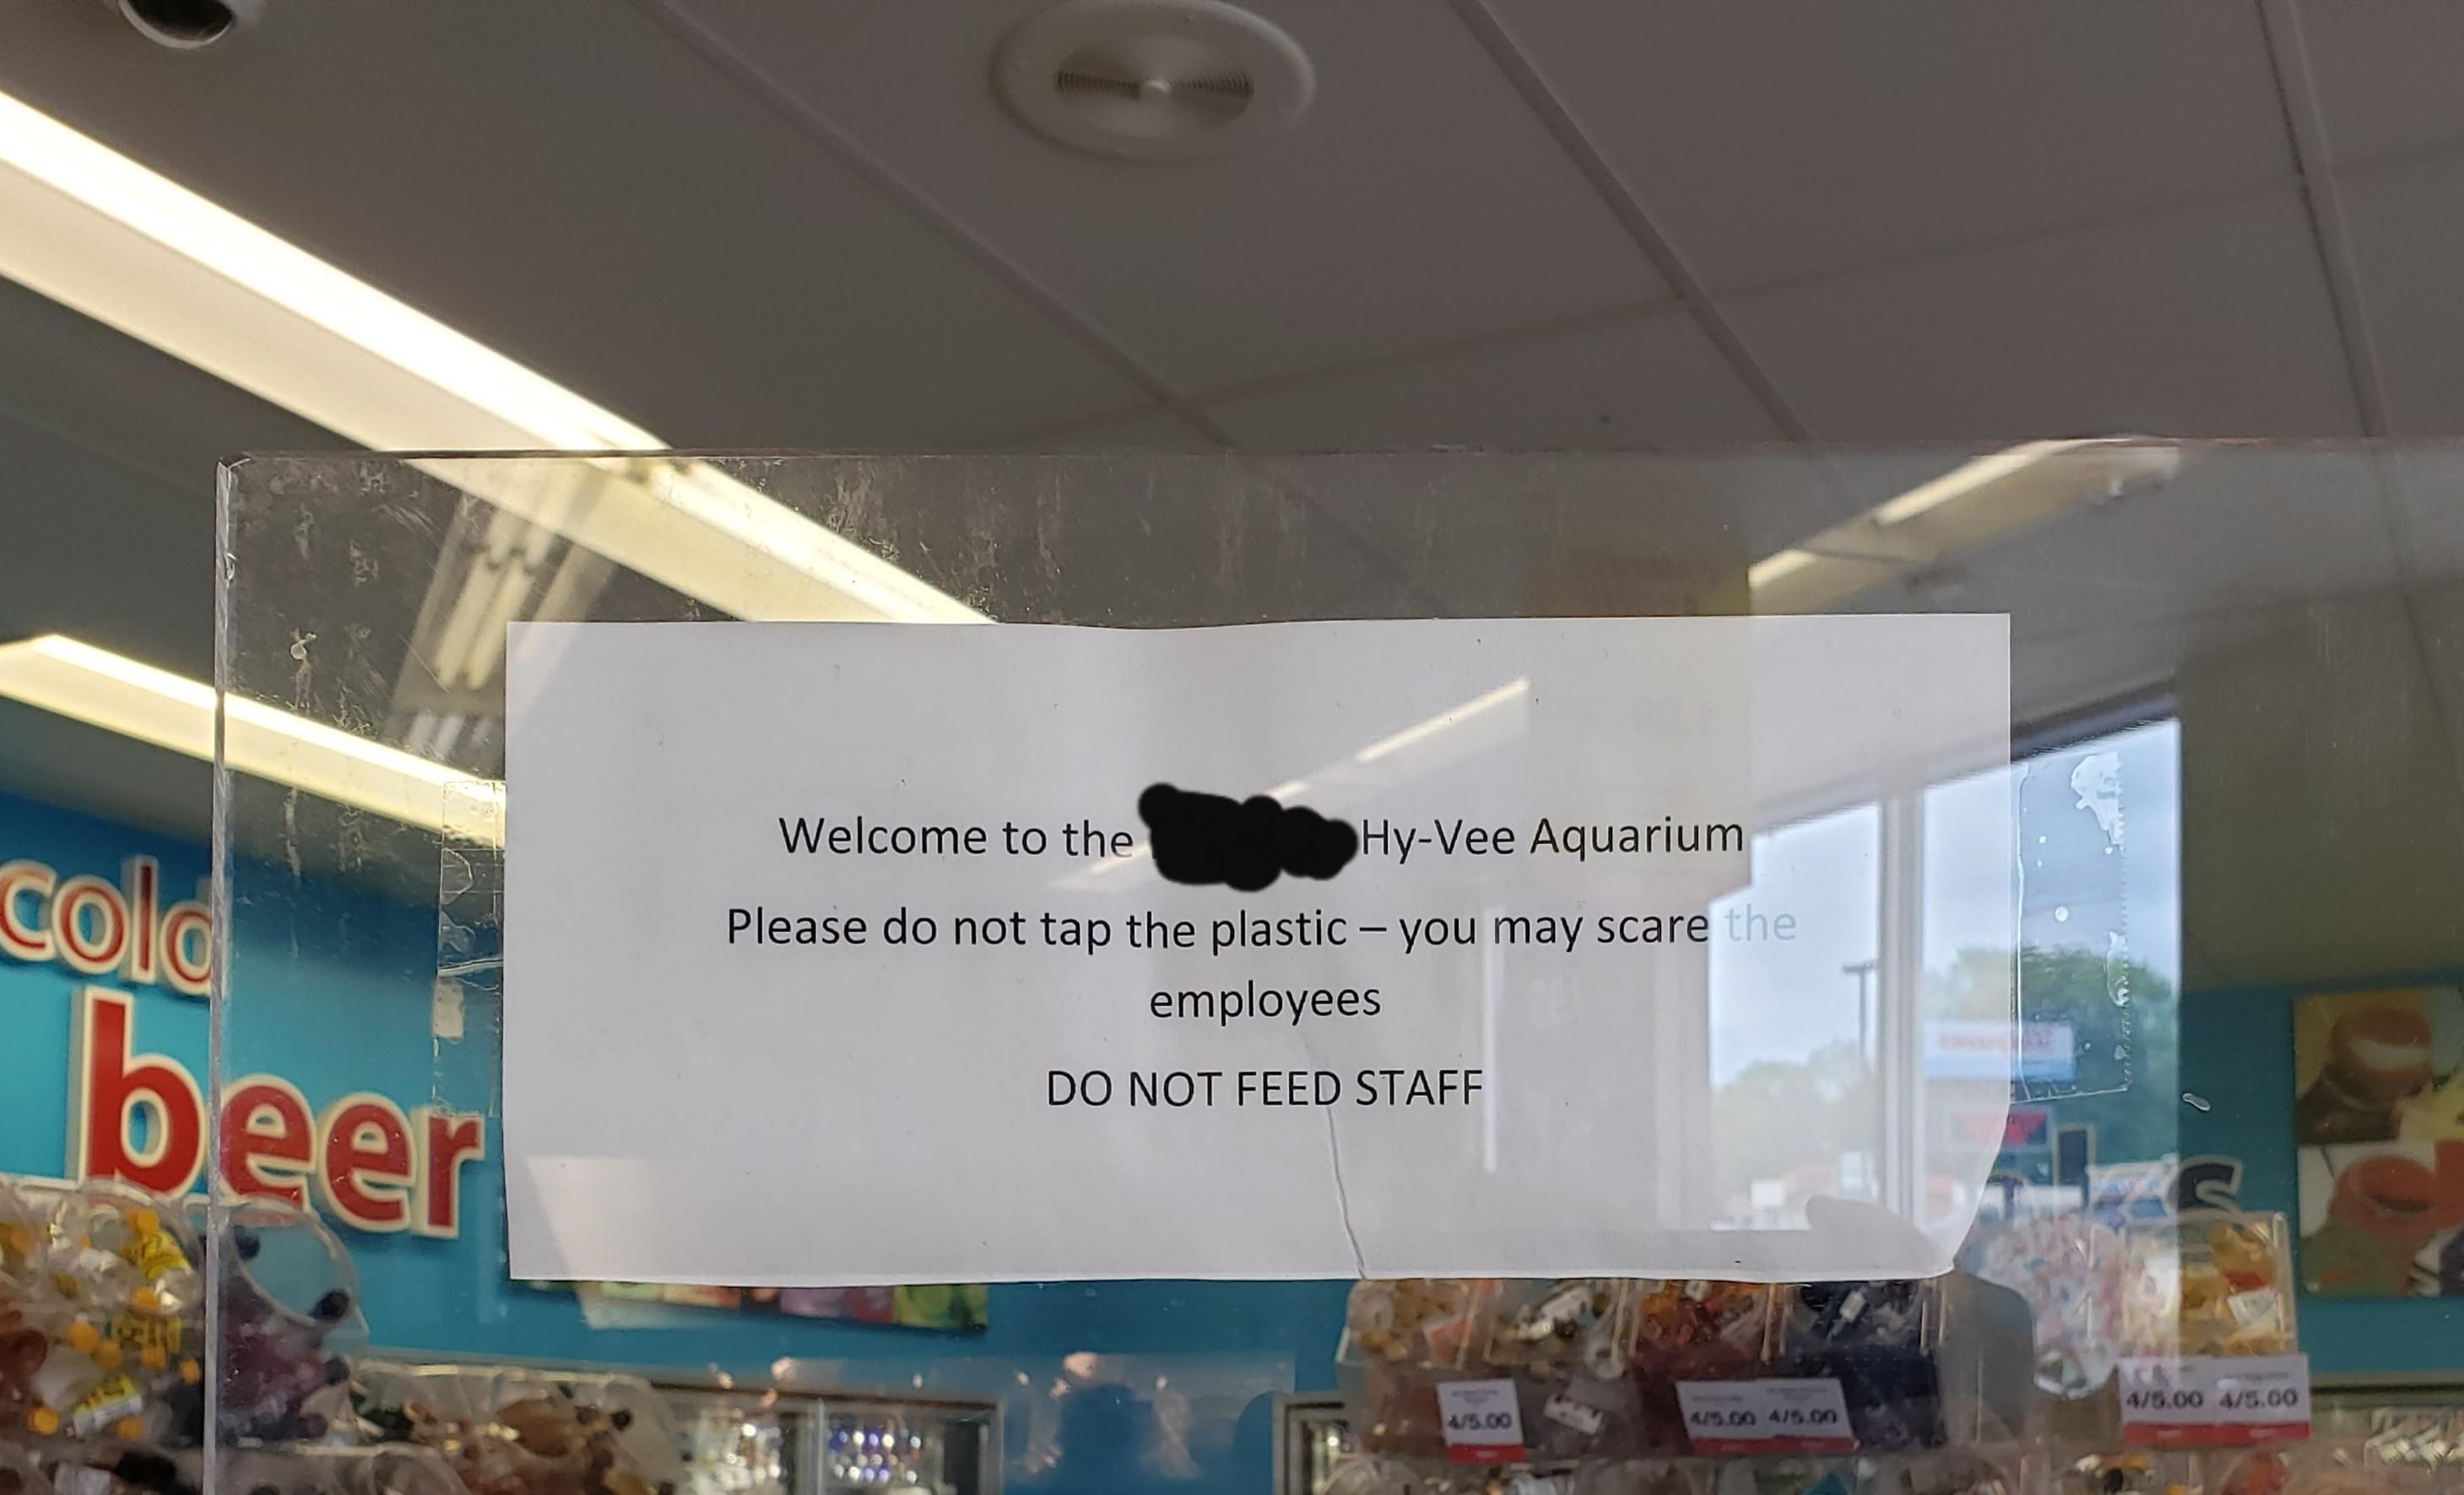 DO NOT FEED STAFF